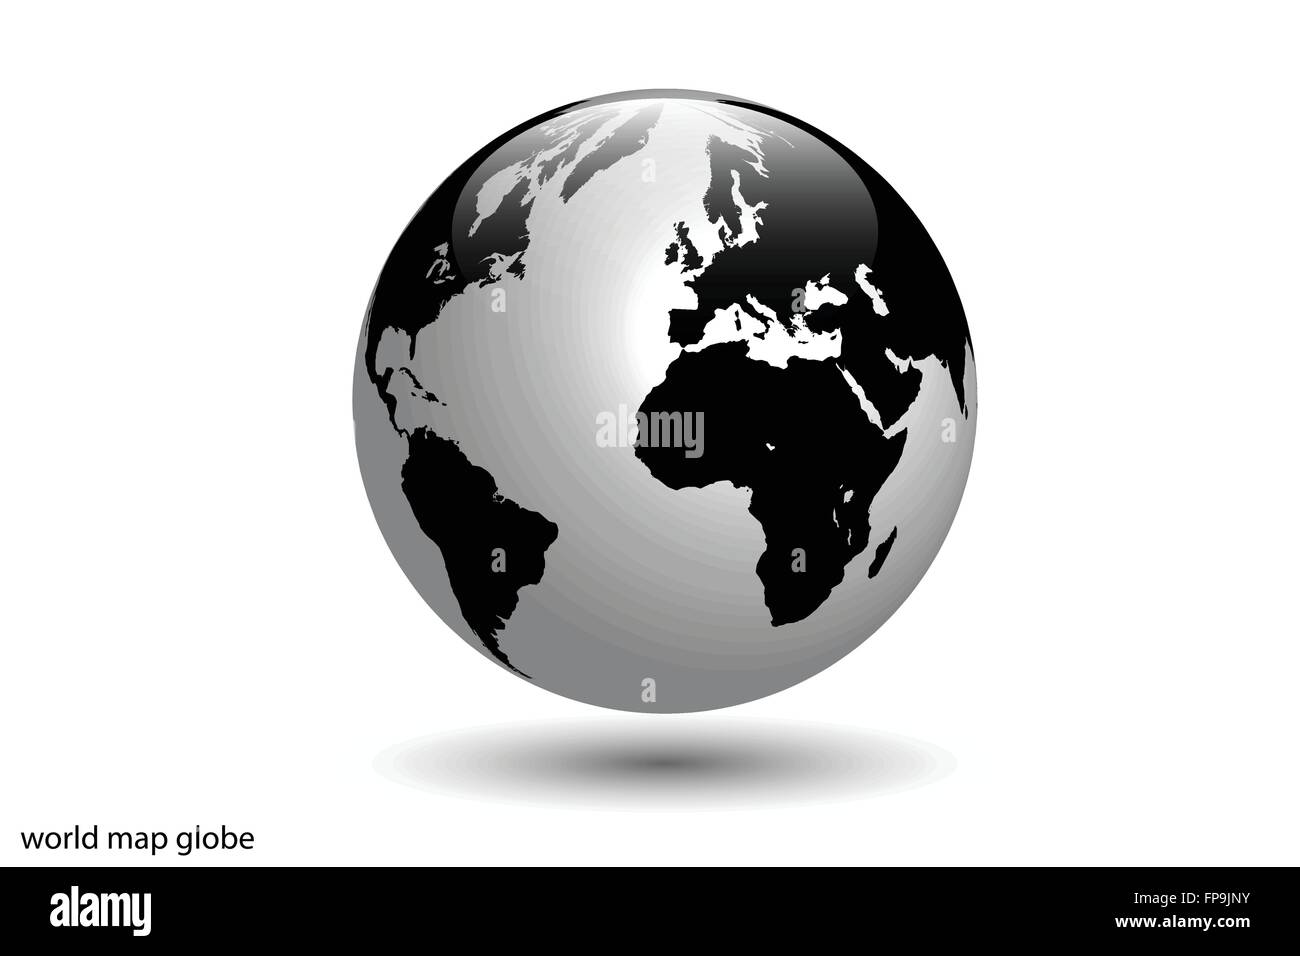 Image of the world globe isolated on a white background. Stock Vector